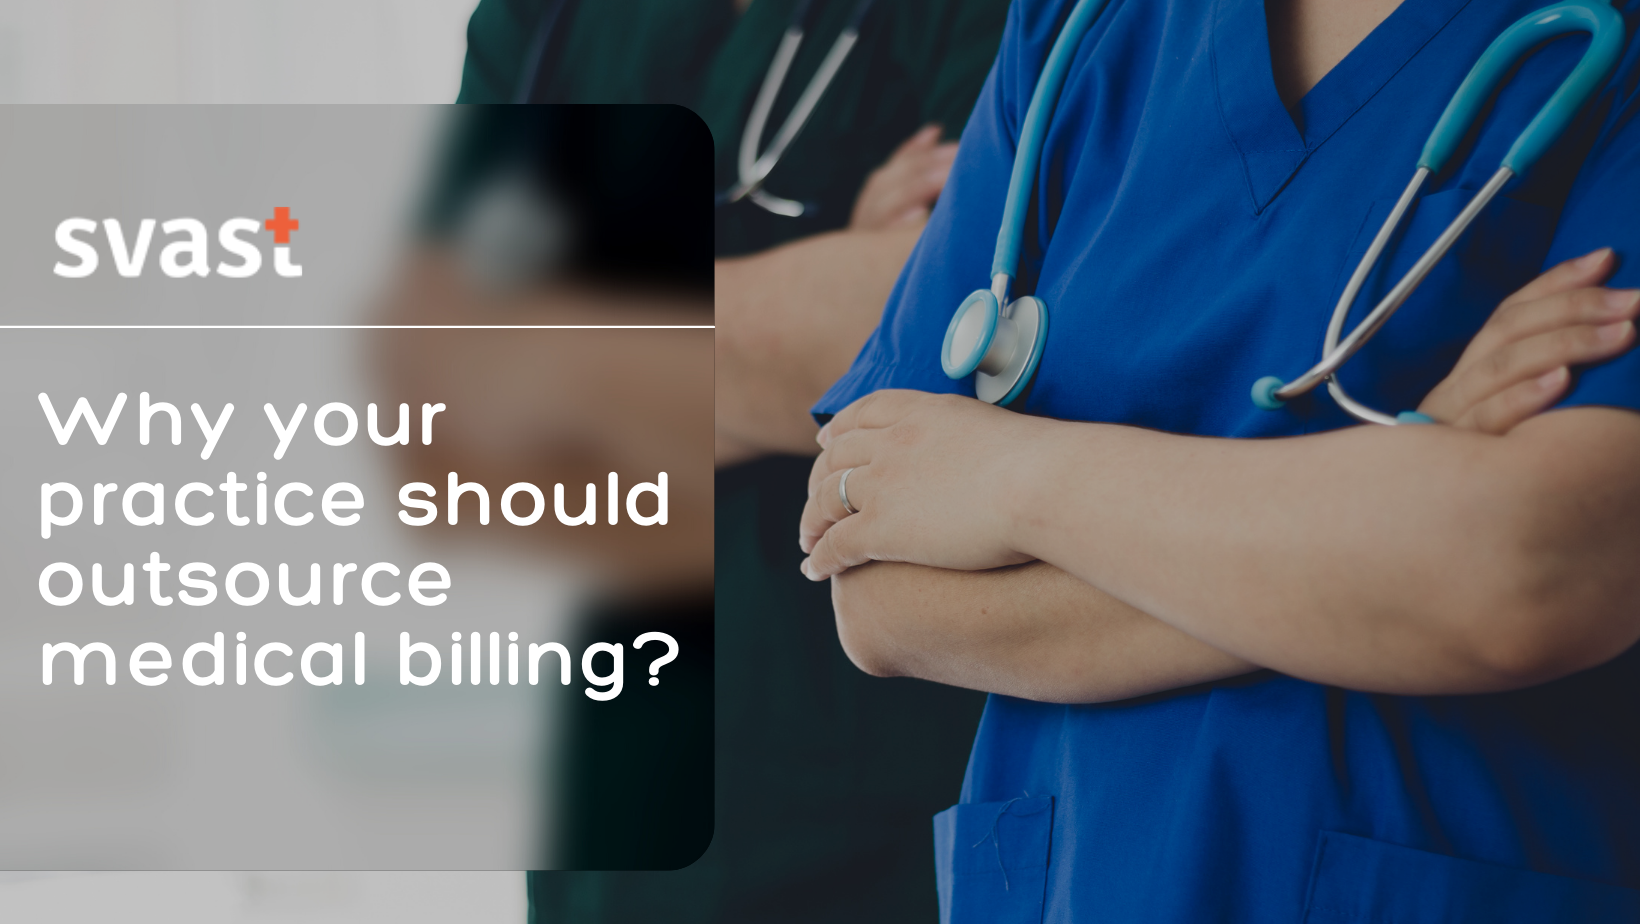 Why your practice should outsource medical billing?